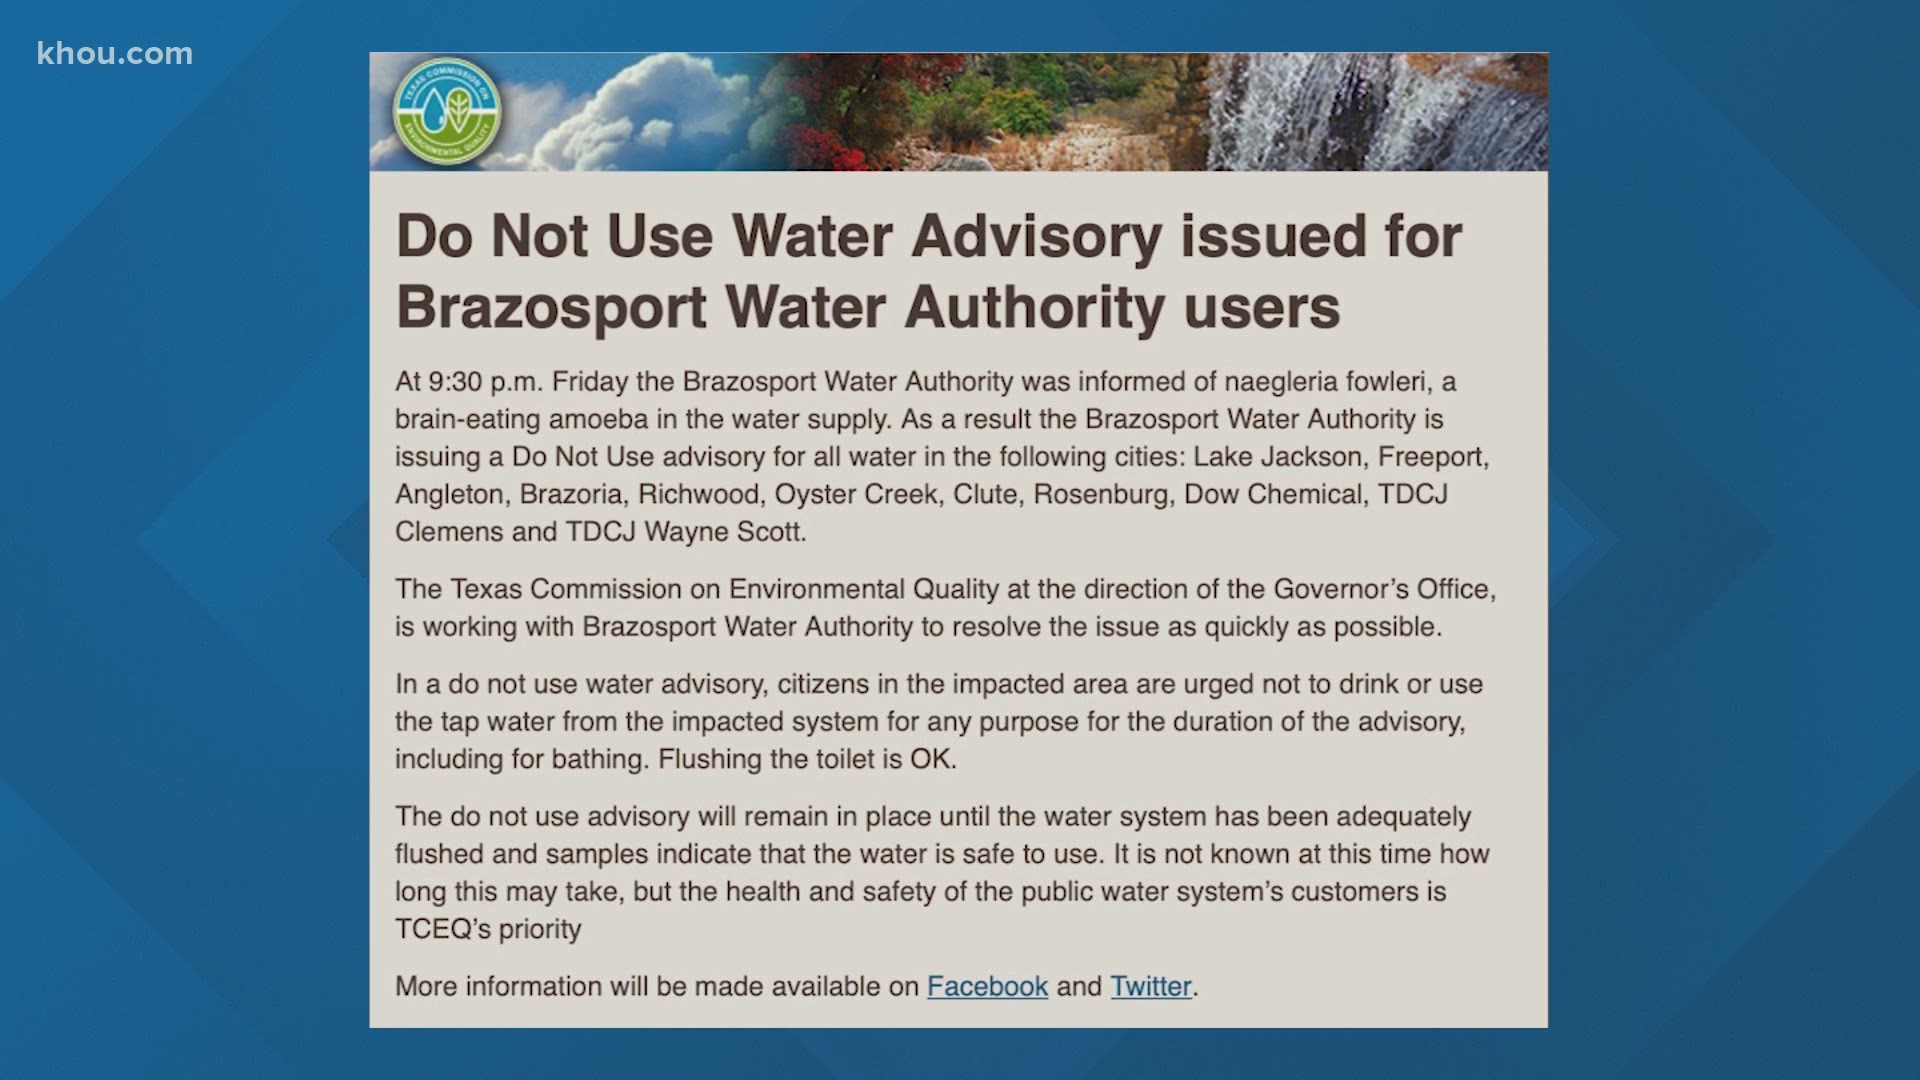 The Brazosport Water Authority has issued a do not use water advisory after it was informed of naegleria fowleri, a brain-eating amoeba in the water supply.